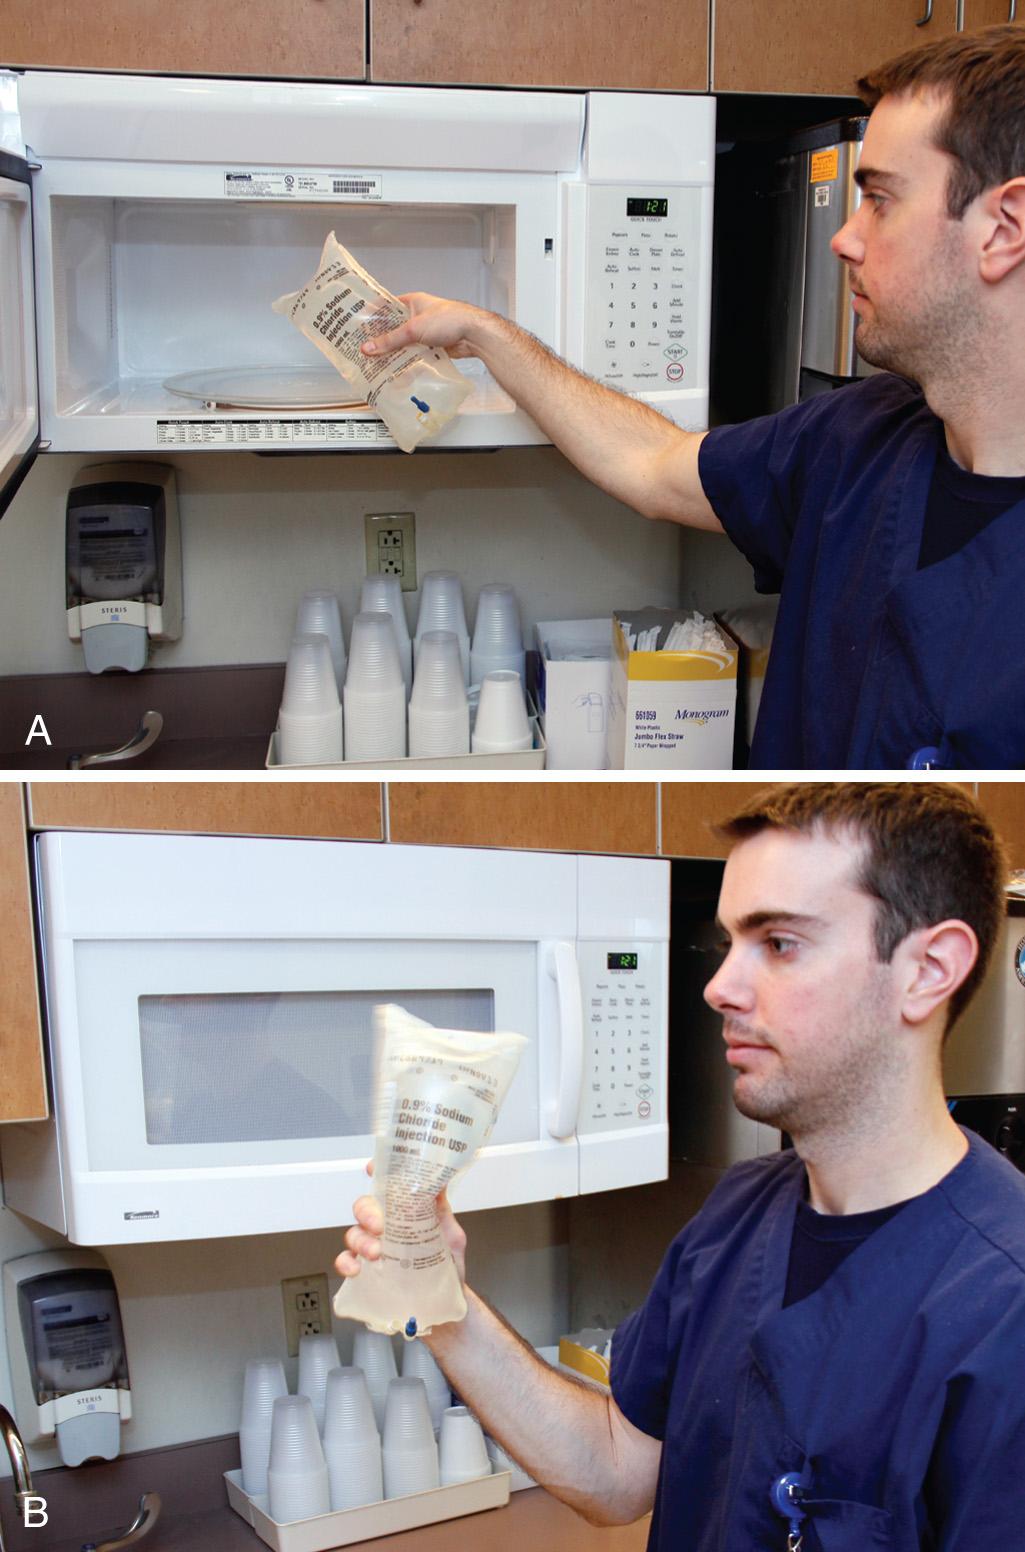 Figure 65.5, A, To rewarm hypothermic patients with intravenous heated saline, a standard 650 W microwave oven, on high for 120 seconds, will raise the temperature of a non–dextrose-containing liter of saline (in a plastic bag) to approximately 100°F. B, Agitate the bag halfway through the warming and again before infusion.